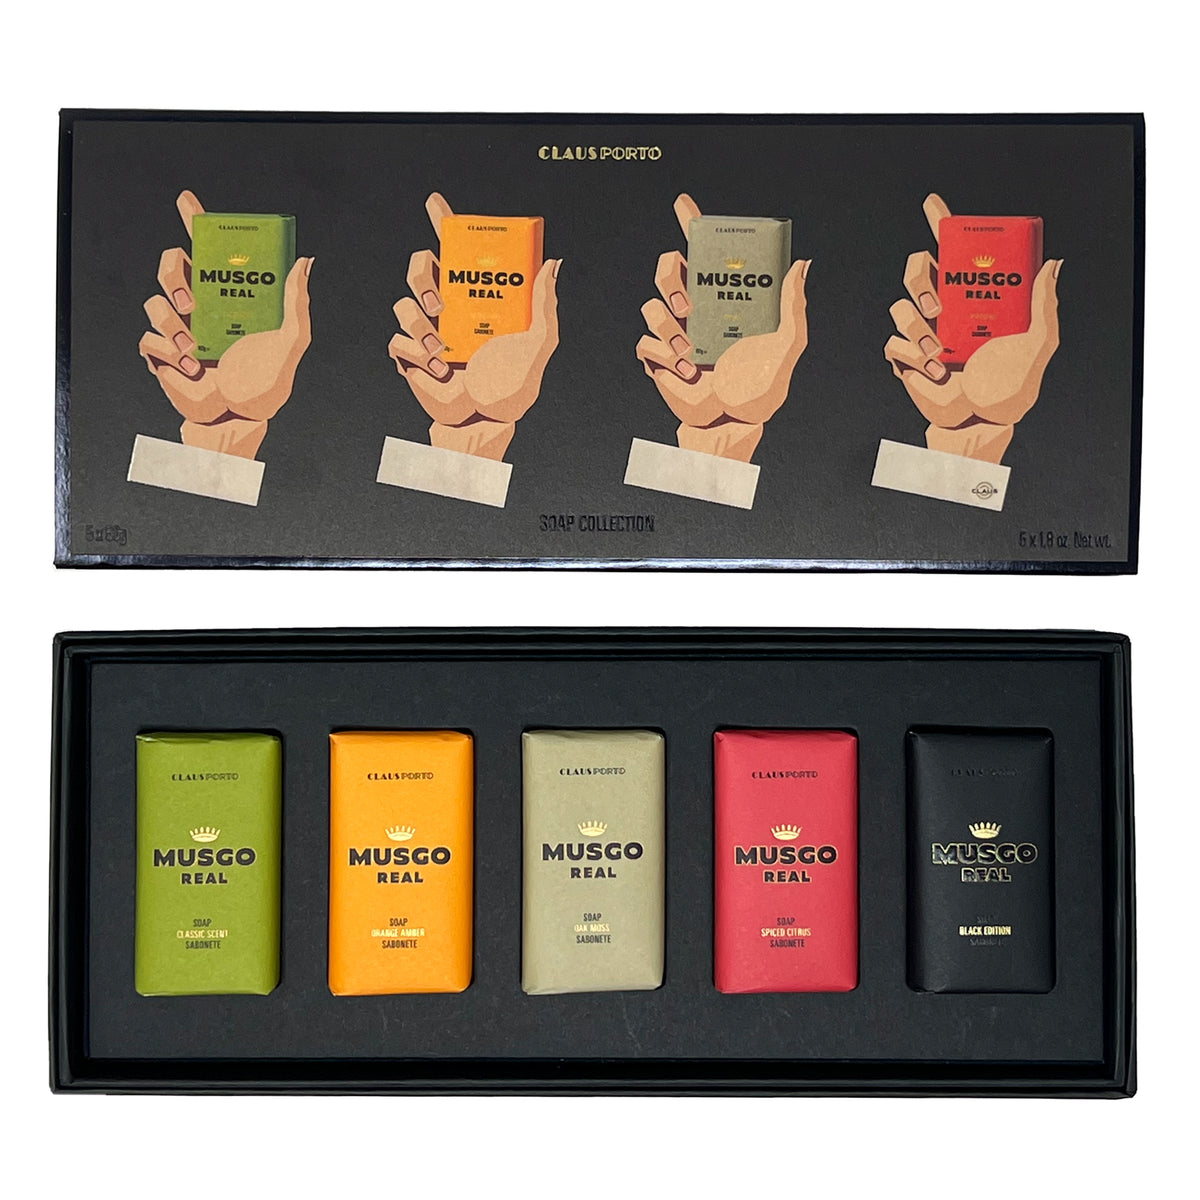 MUSGO REAL Soap Gift Collection – David Wood Clothiers